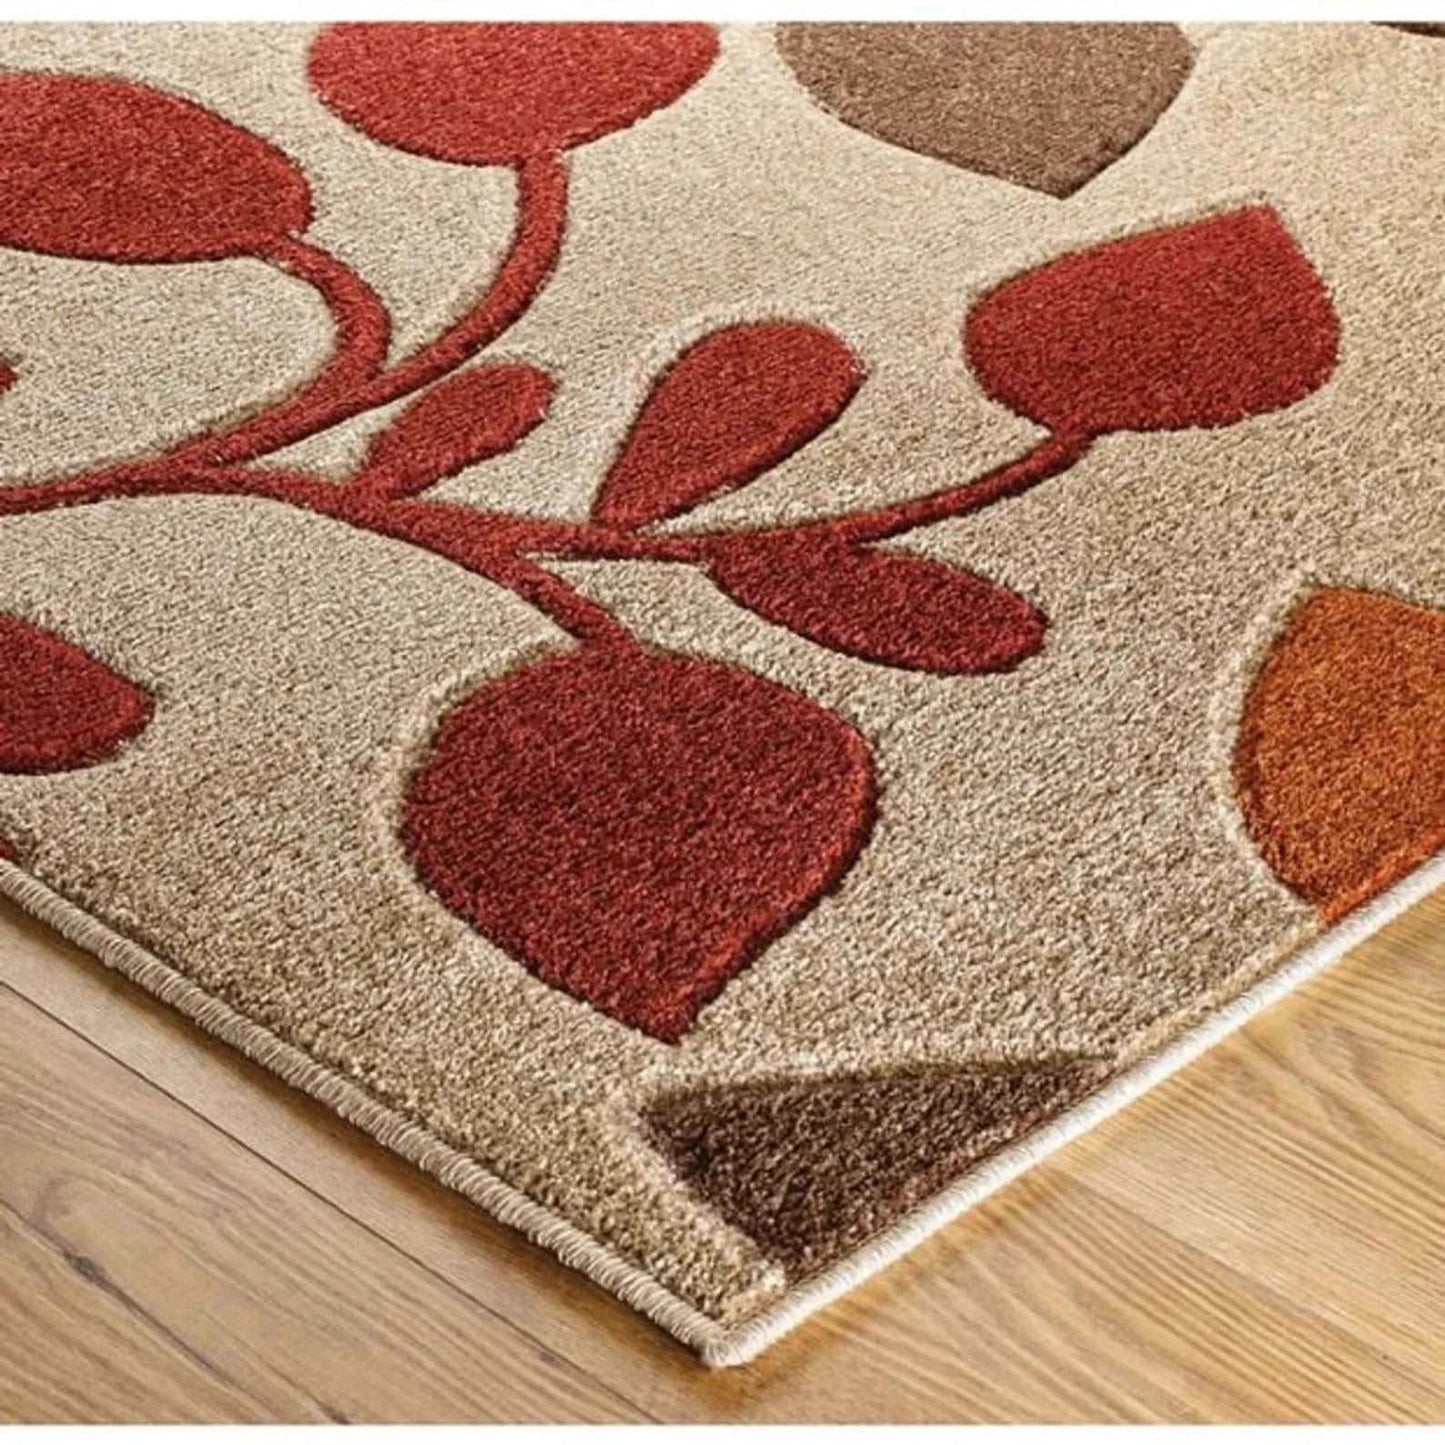 Multi color Abstract Designer hand Tufted Rug Woven Tufted Rug Fine Woolen Custom Area Rug Hand Tuft Rug OVERSIZED RUGS 10X14,10X16,10X18 Ft